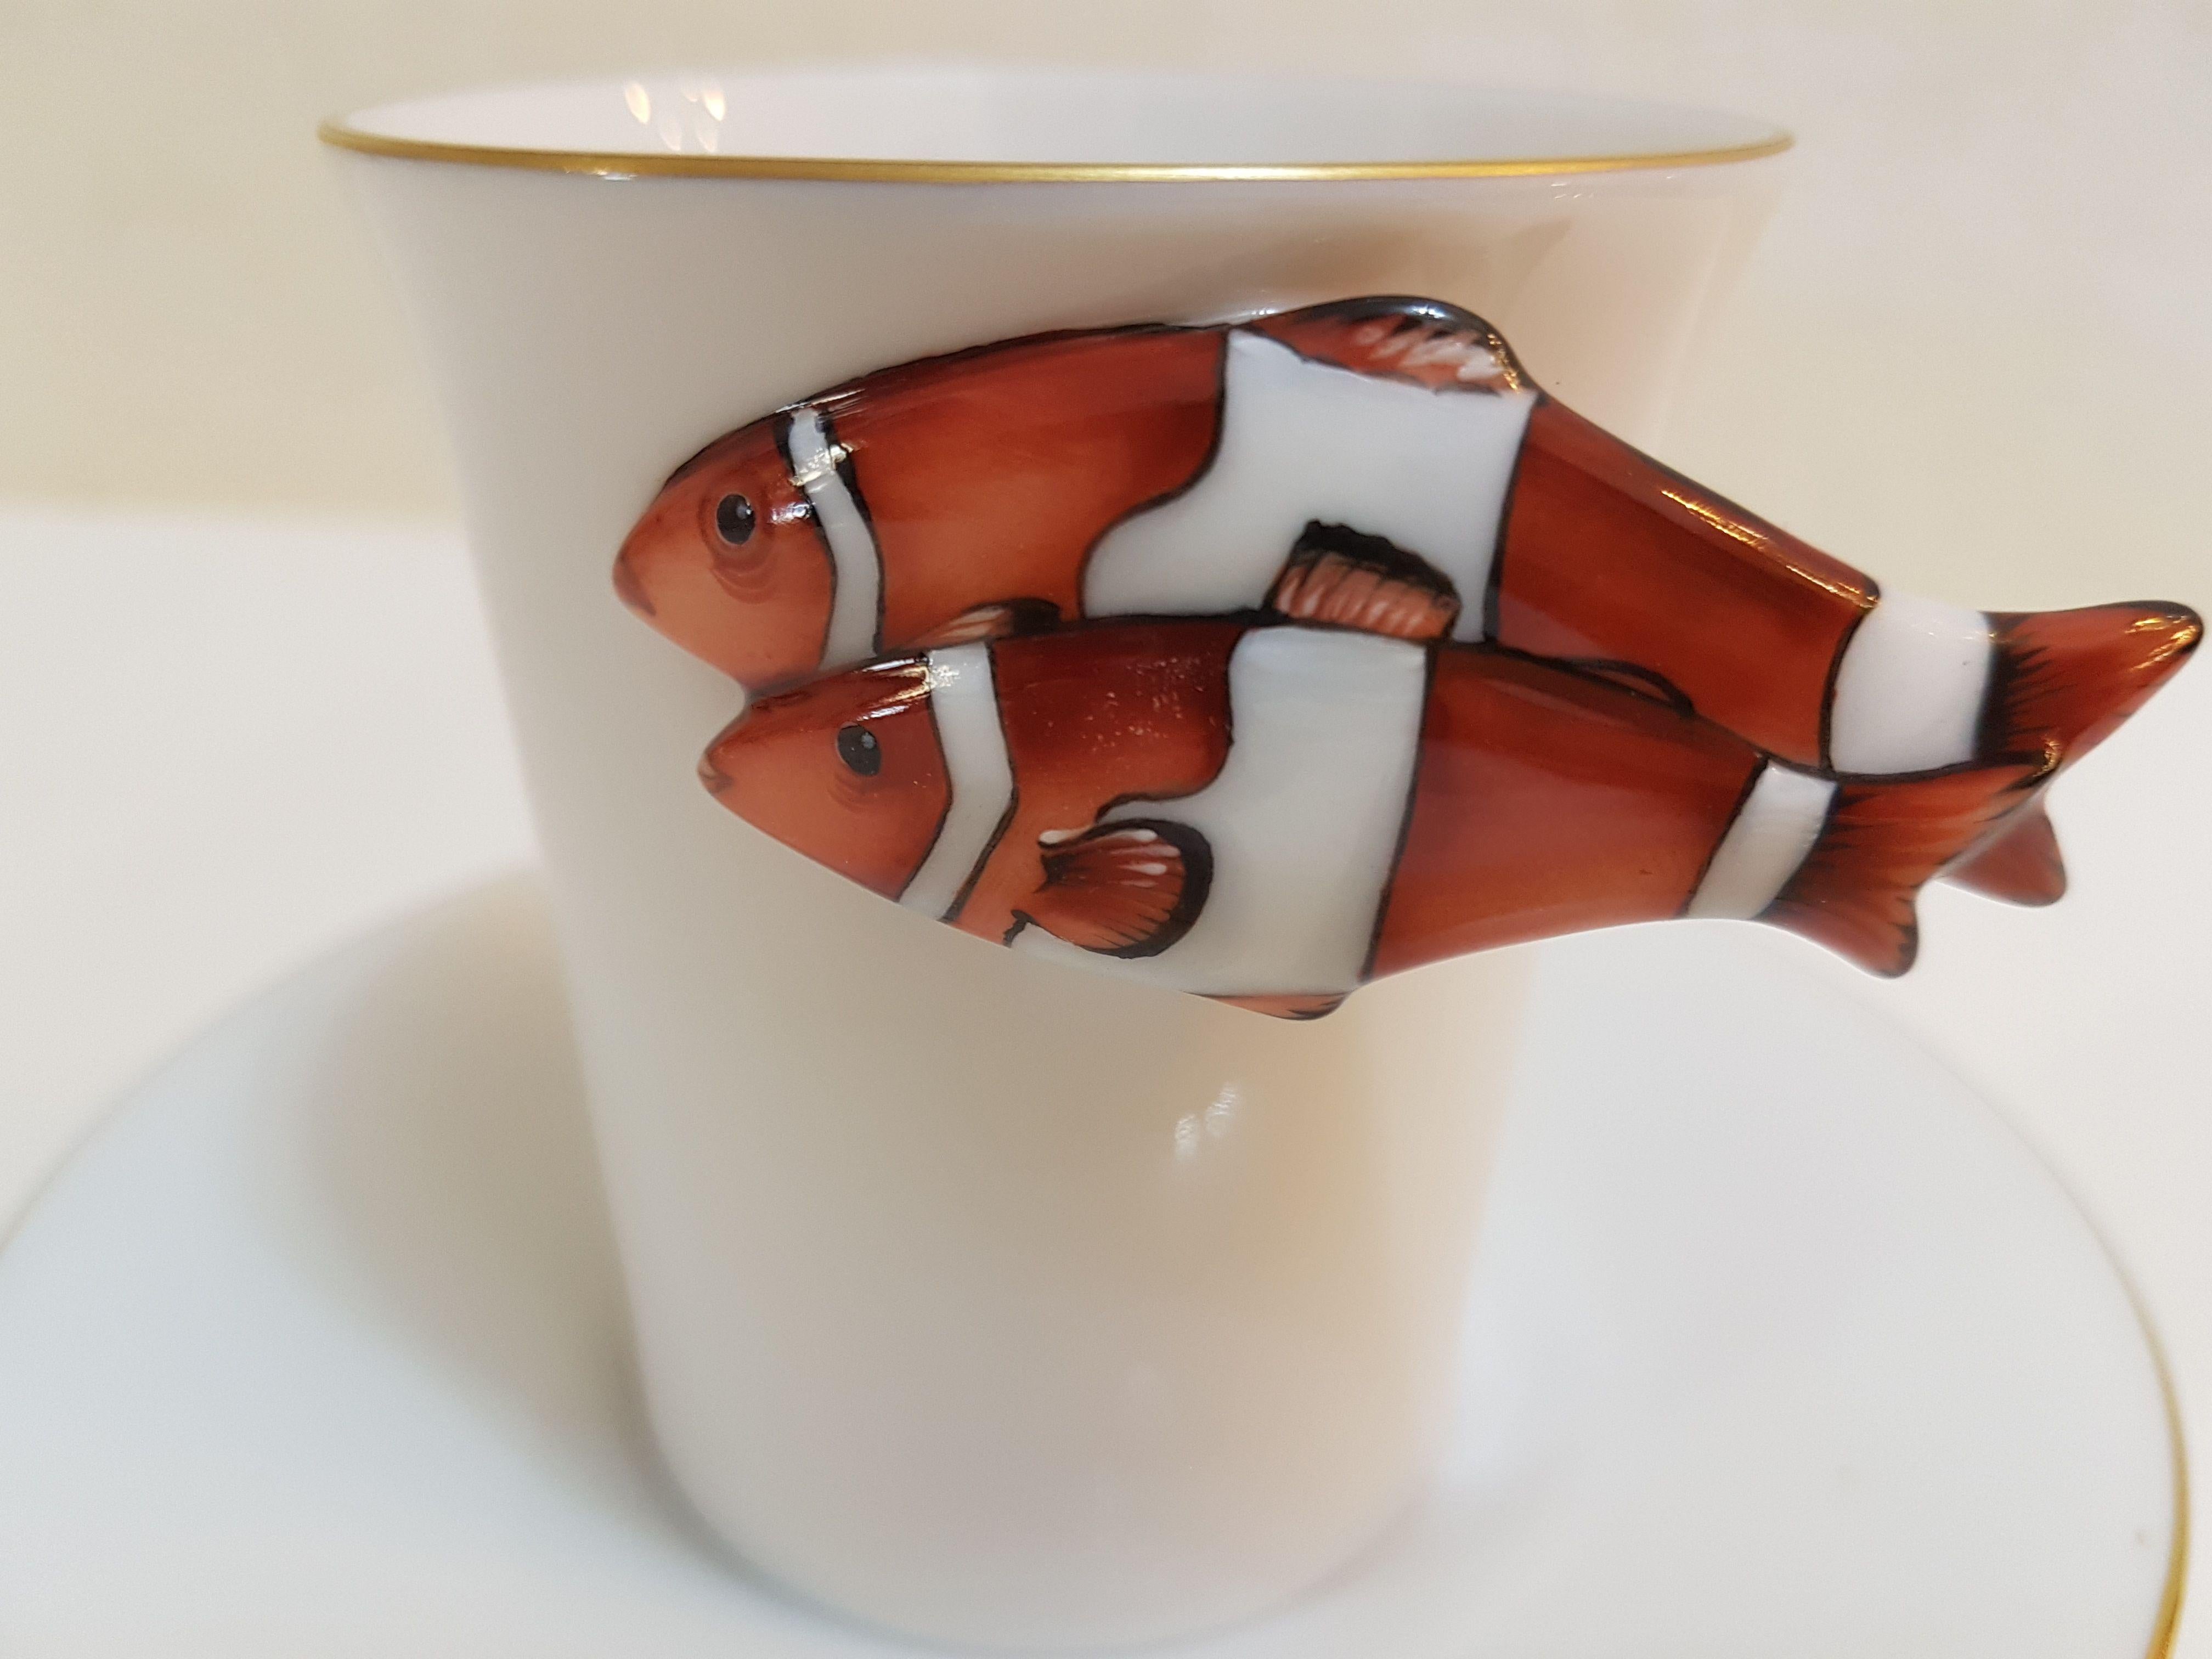 Gorgeus hand painted Herend with a decoration of Anemonefish or Clownfish 